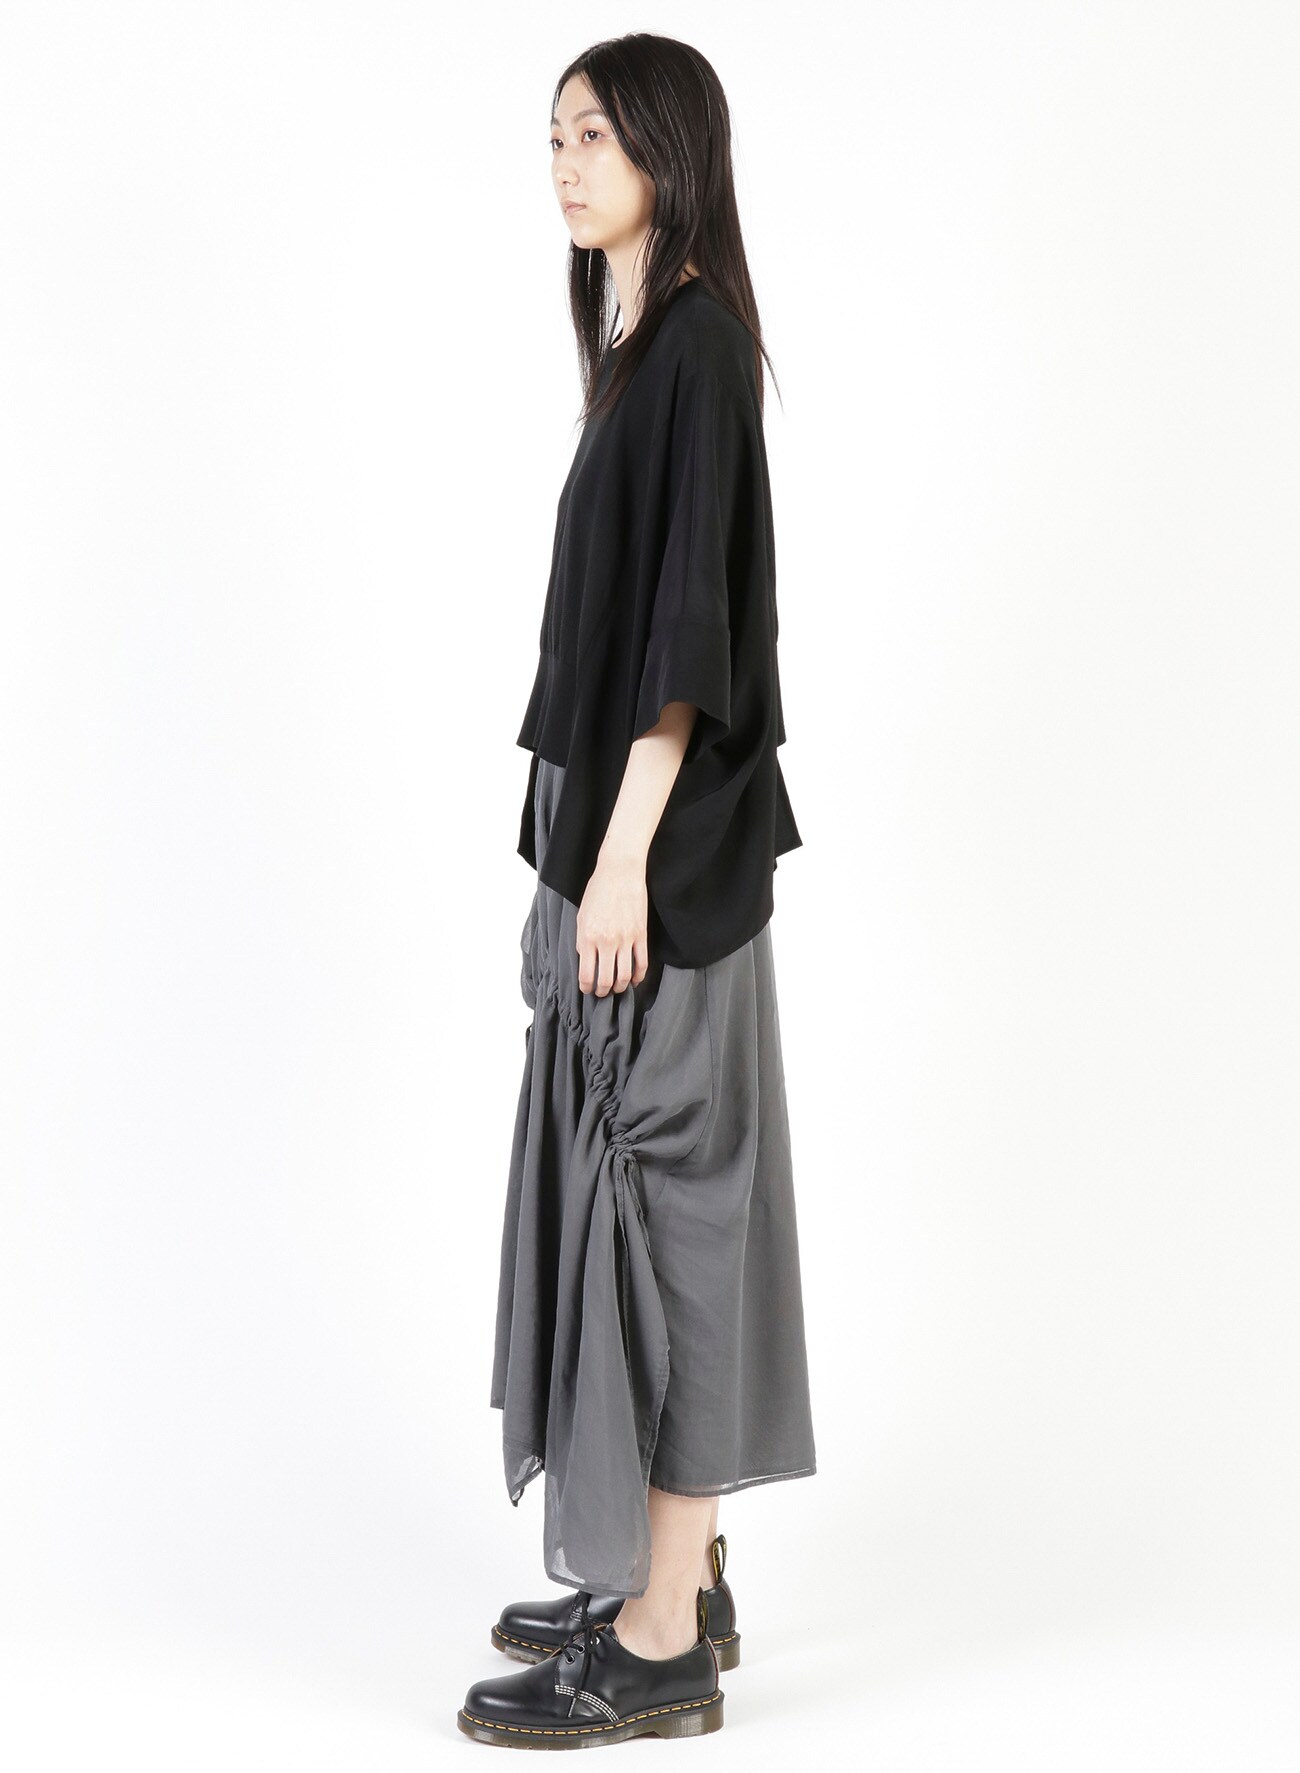 TRIACETATE POLYESTER de CHINE + COTTON RAYON SILK DUAL FABRIC PANEL PULLOVER